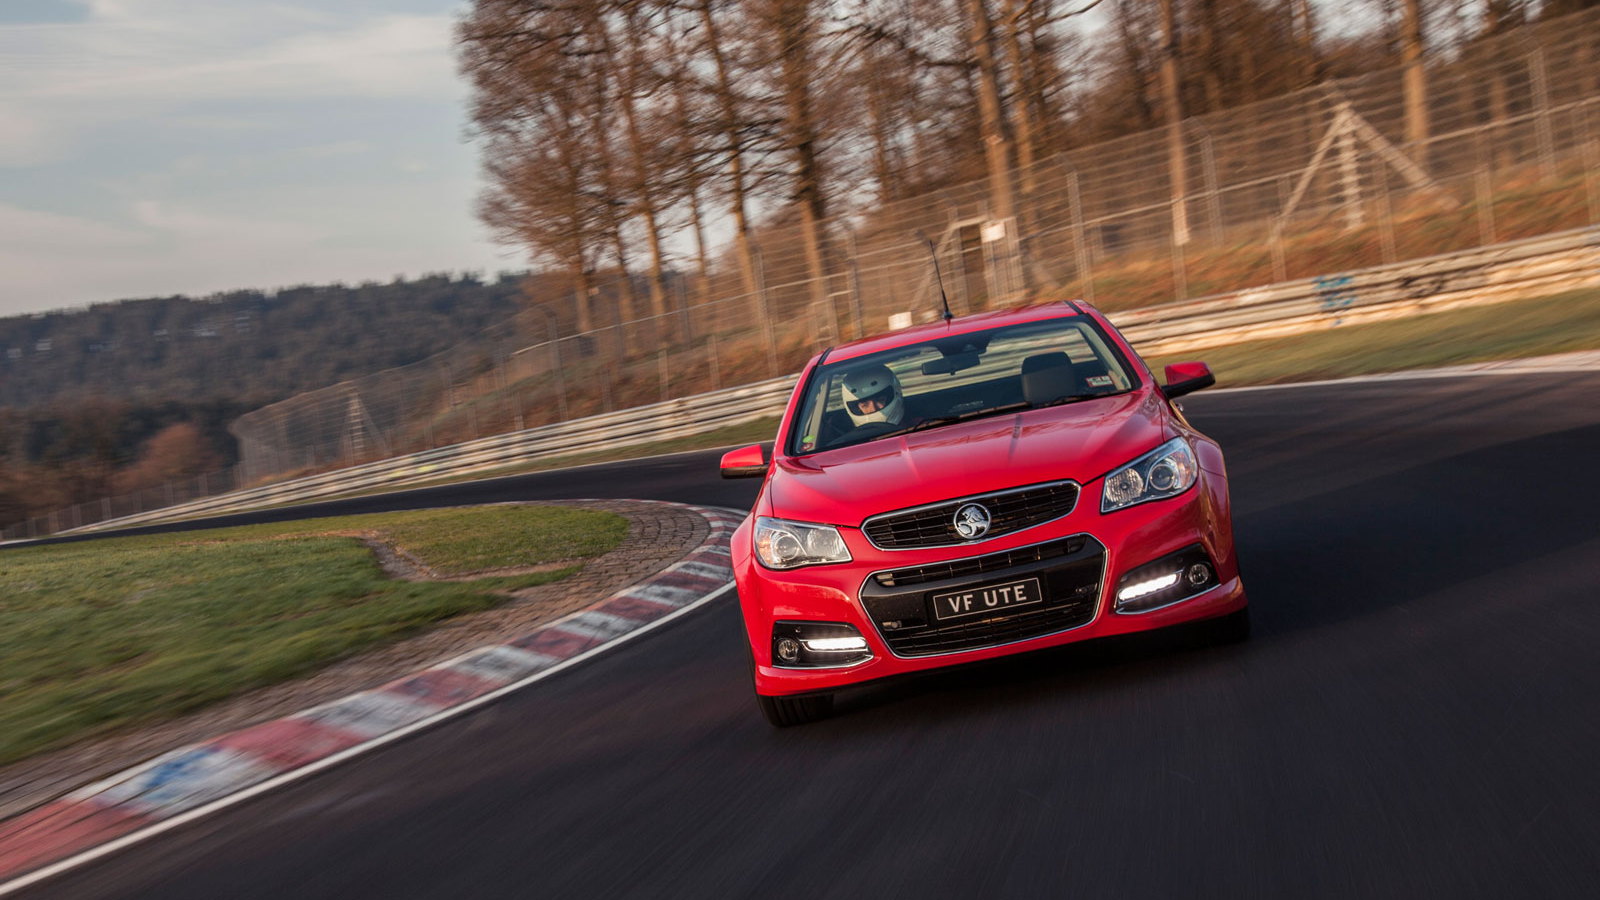 2013 Holden Commodore SS V Ute at the Nürburgring